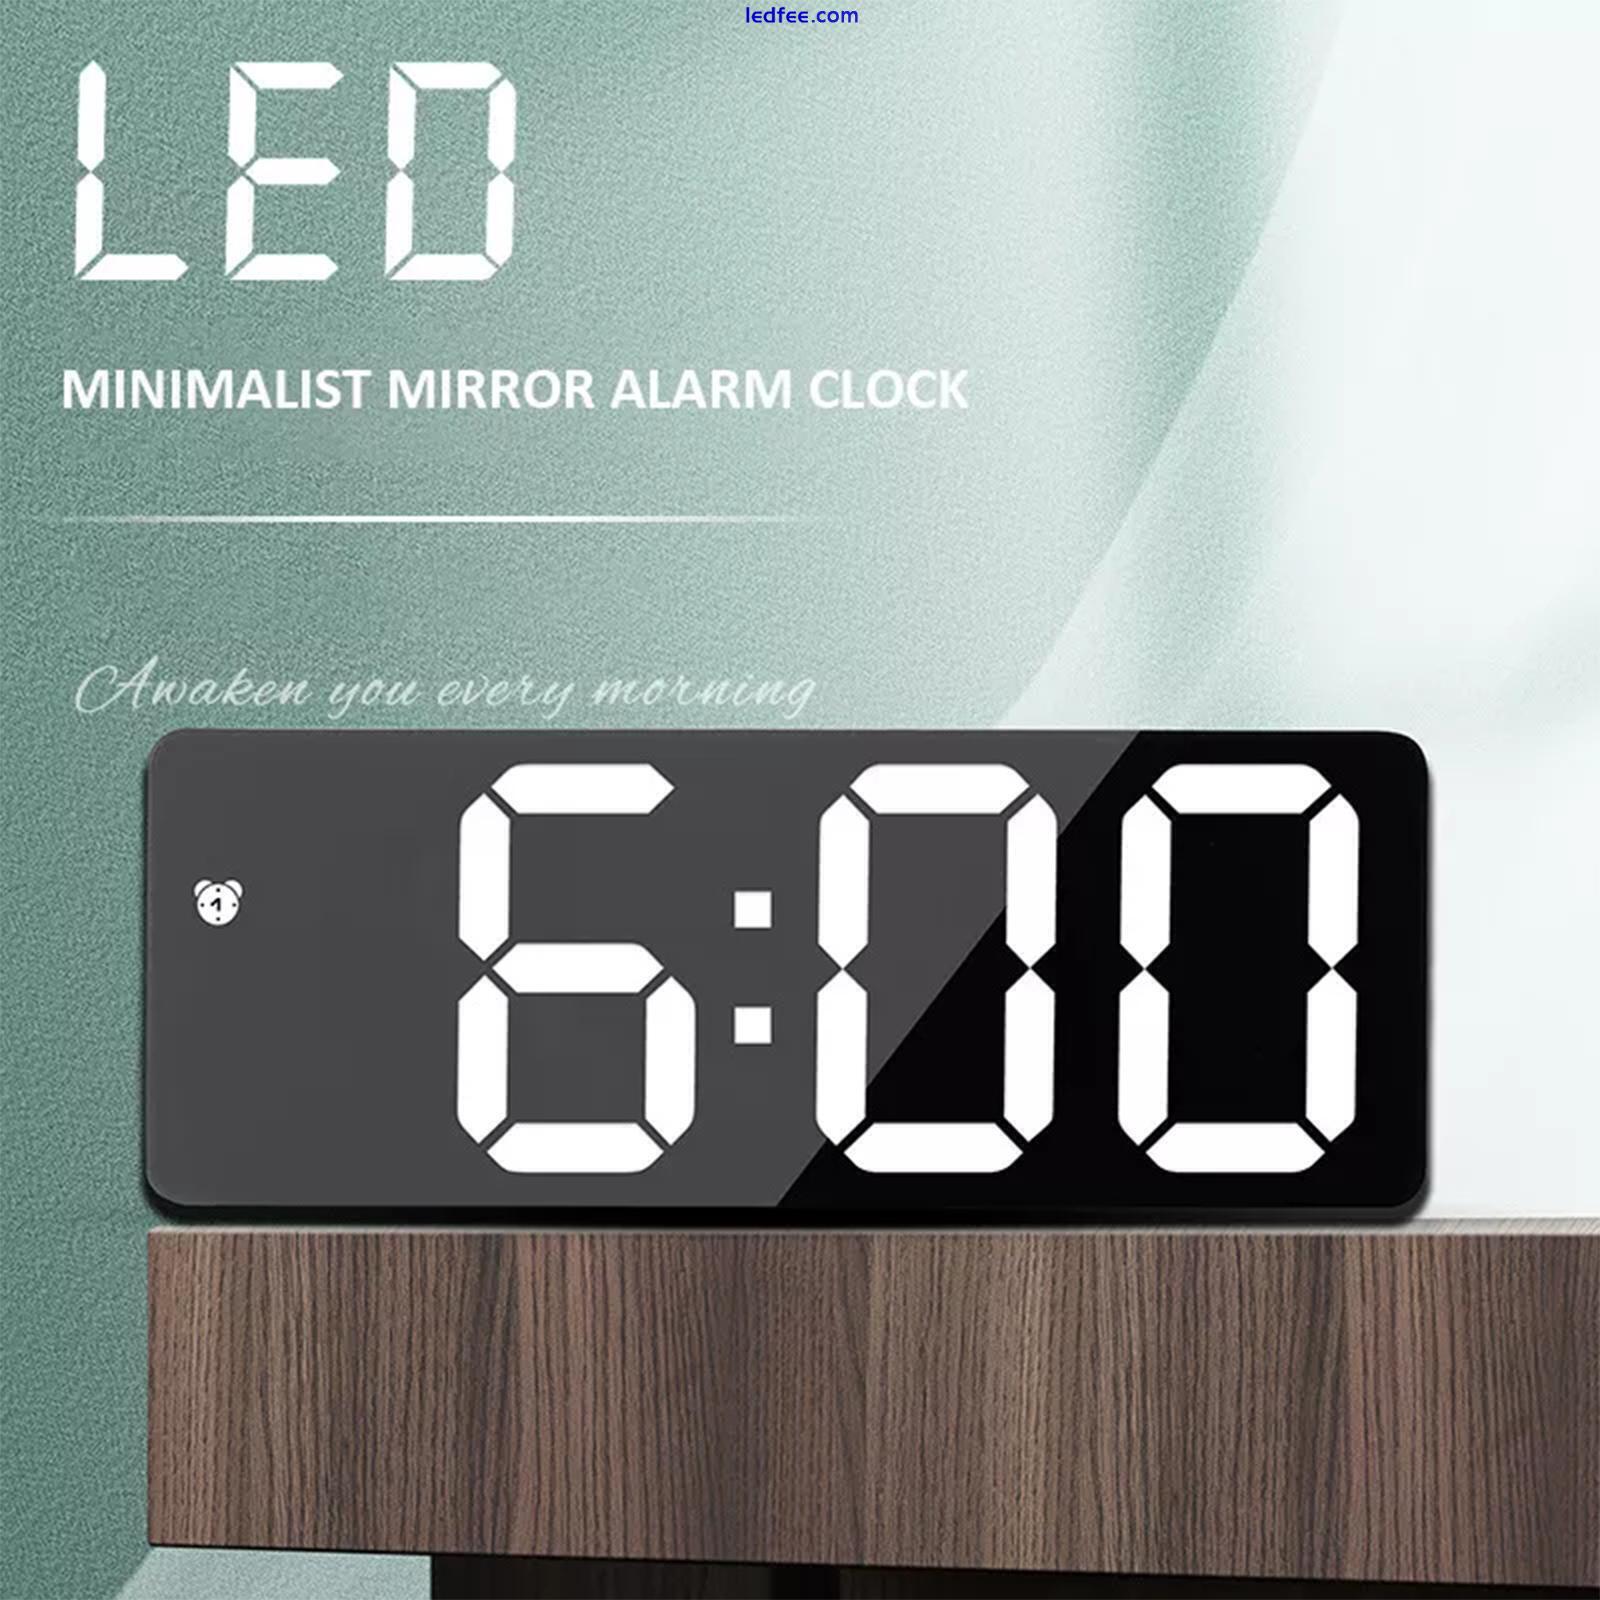 Large LED Mirror Alarm Clock with USB Temperature Display and Snooze σ: 0 